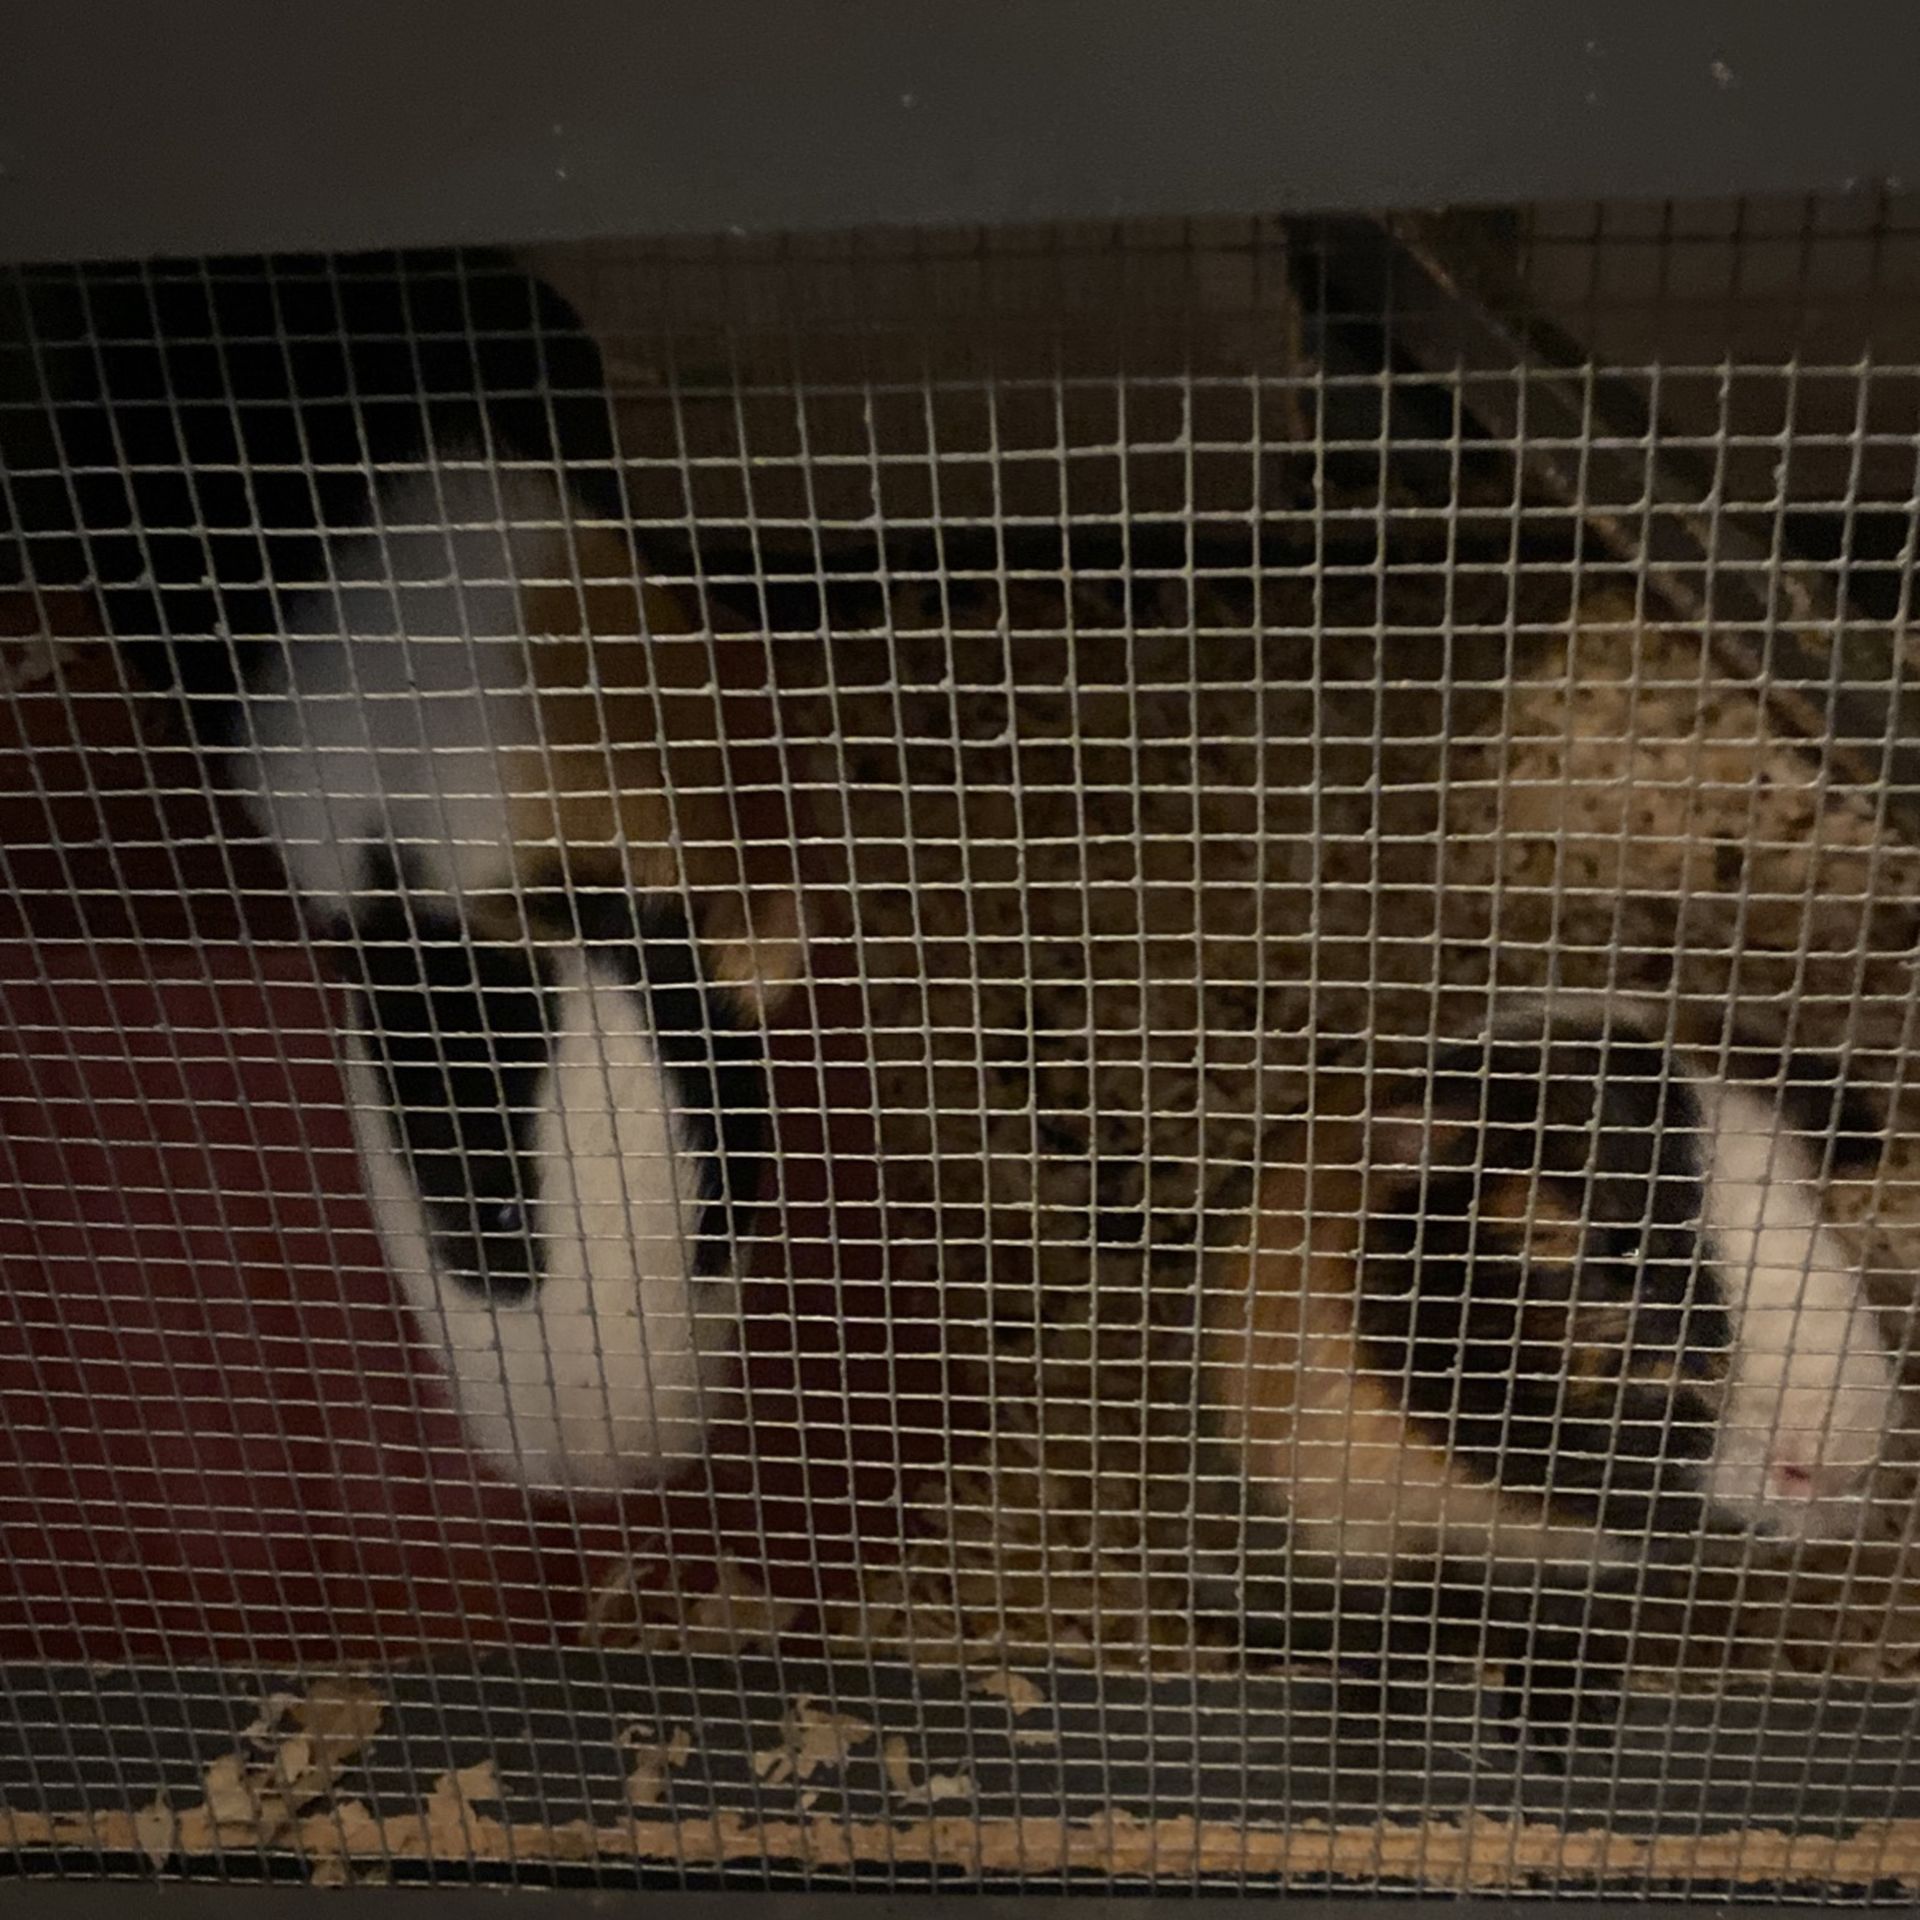 Two guinea pigs for Free Cage Food etc.